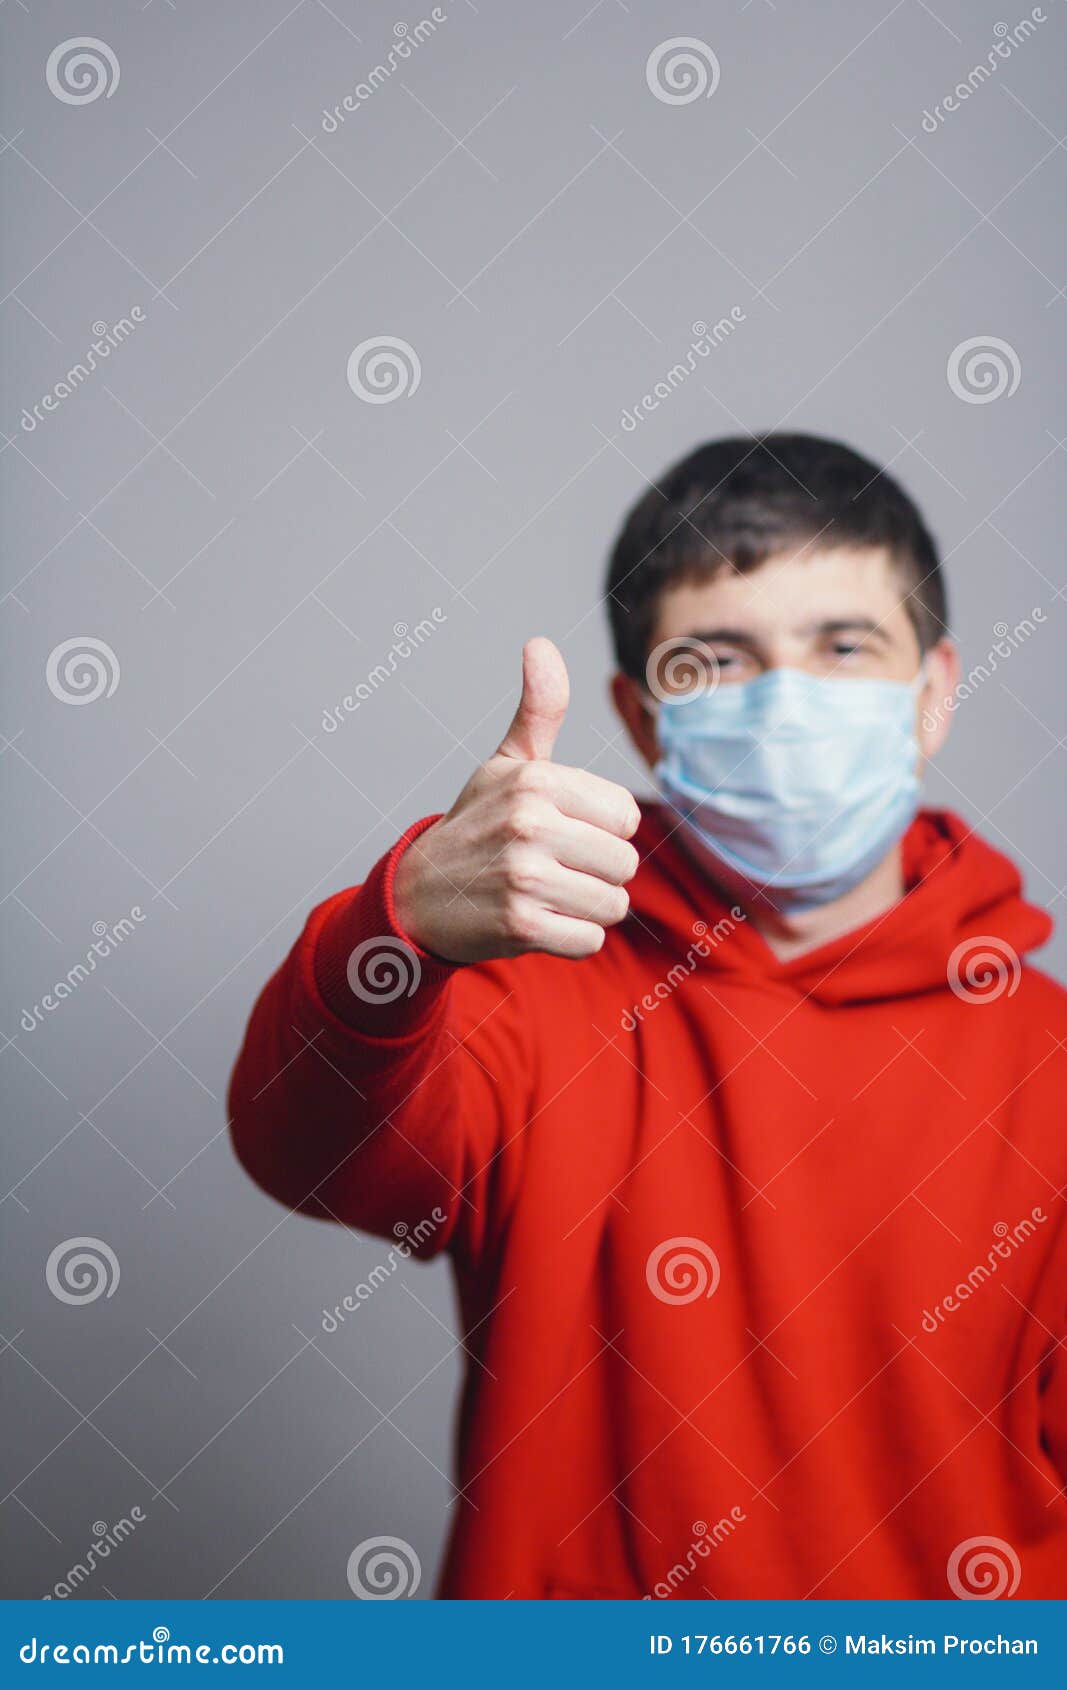 Young Man in Red Sweatshirt Wearing a Protective Mask on His Face and ...